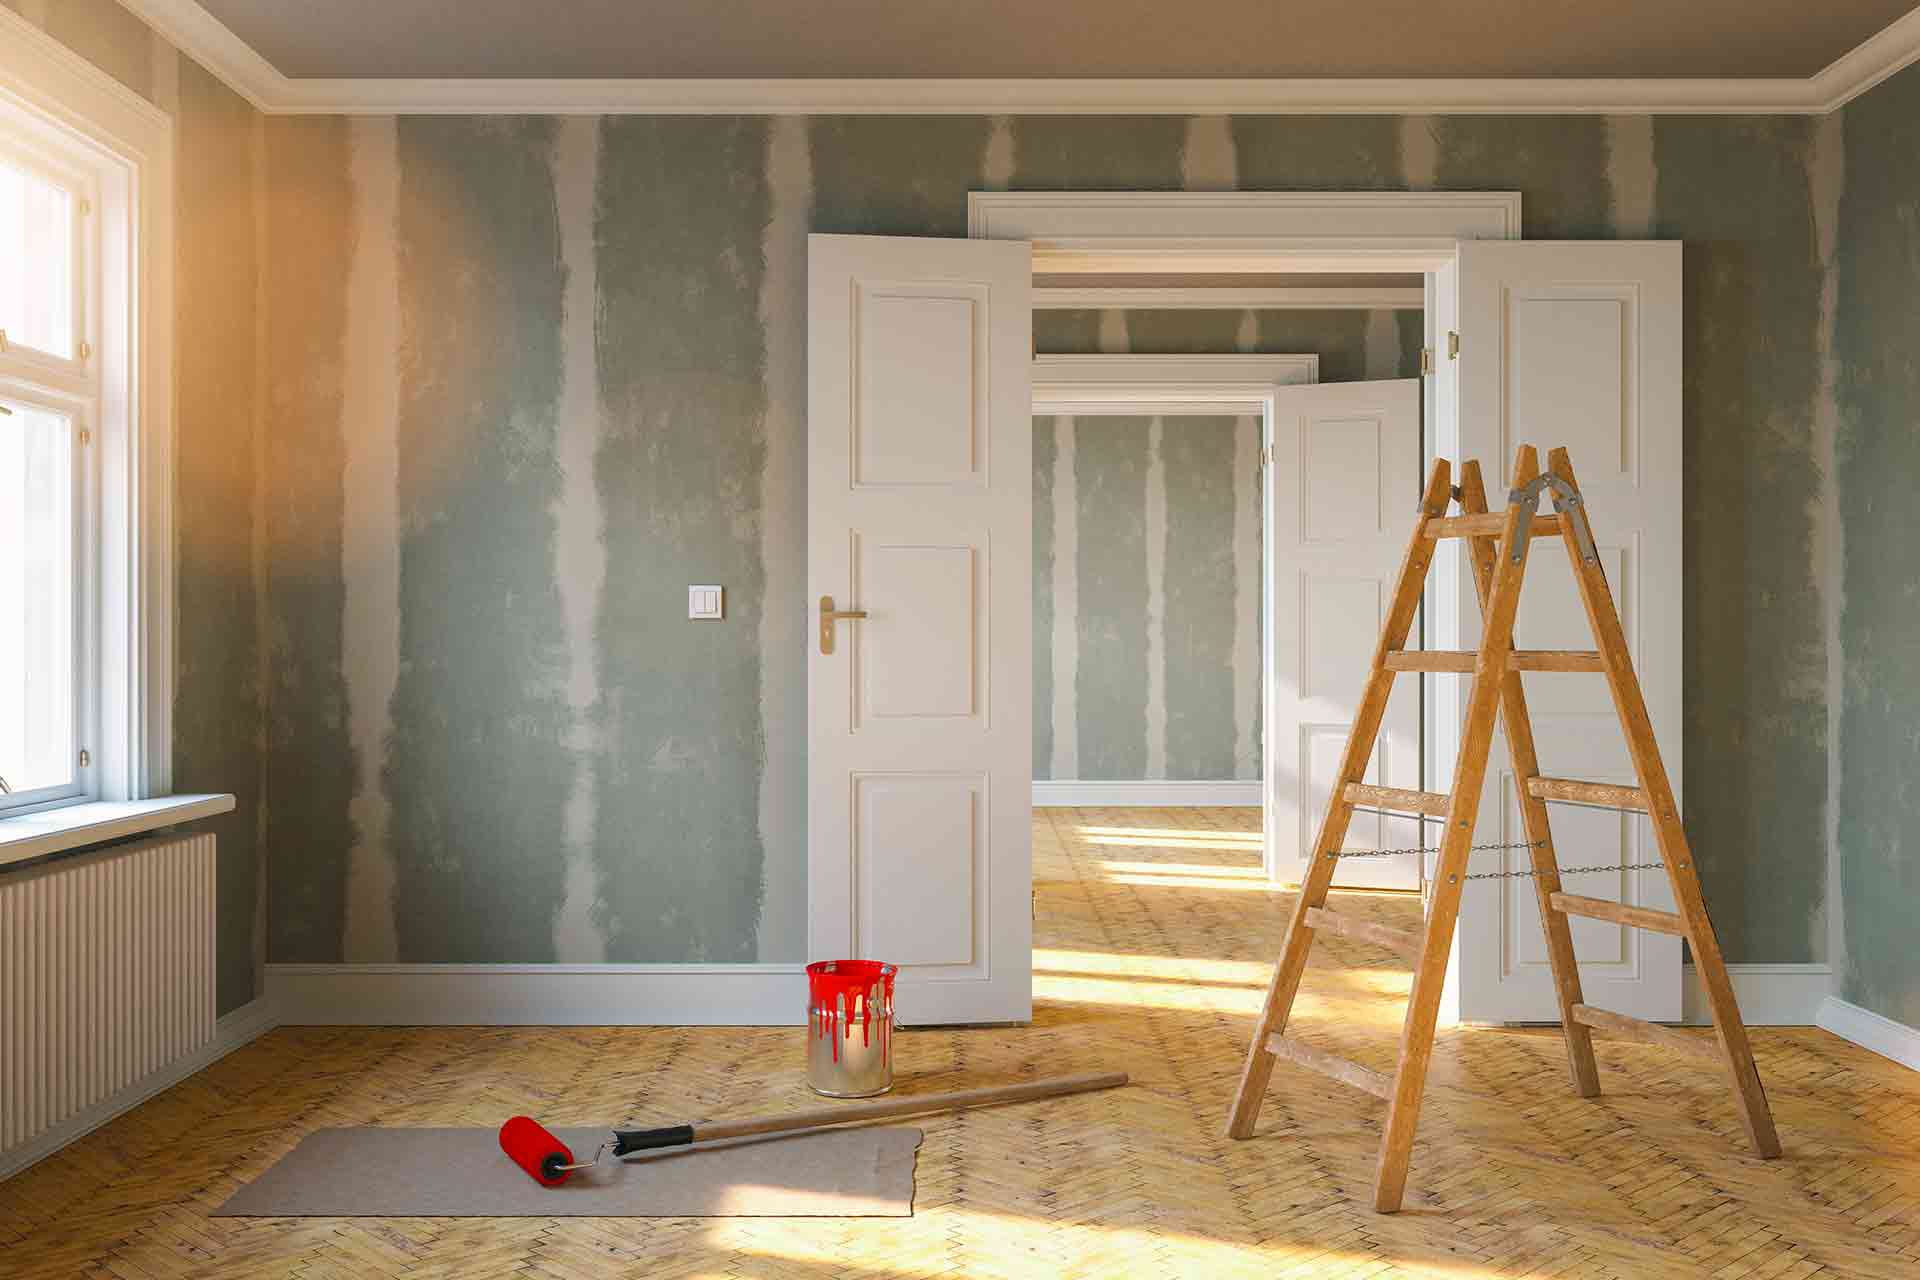 Renovation Planning Checklist for Property Managers